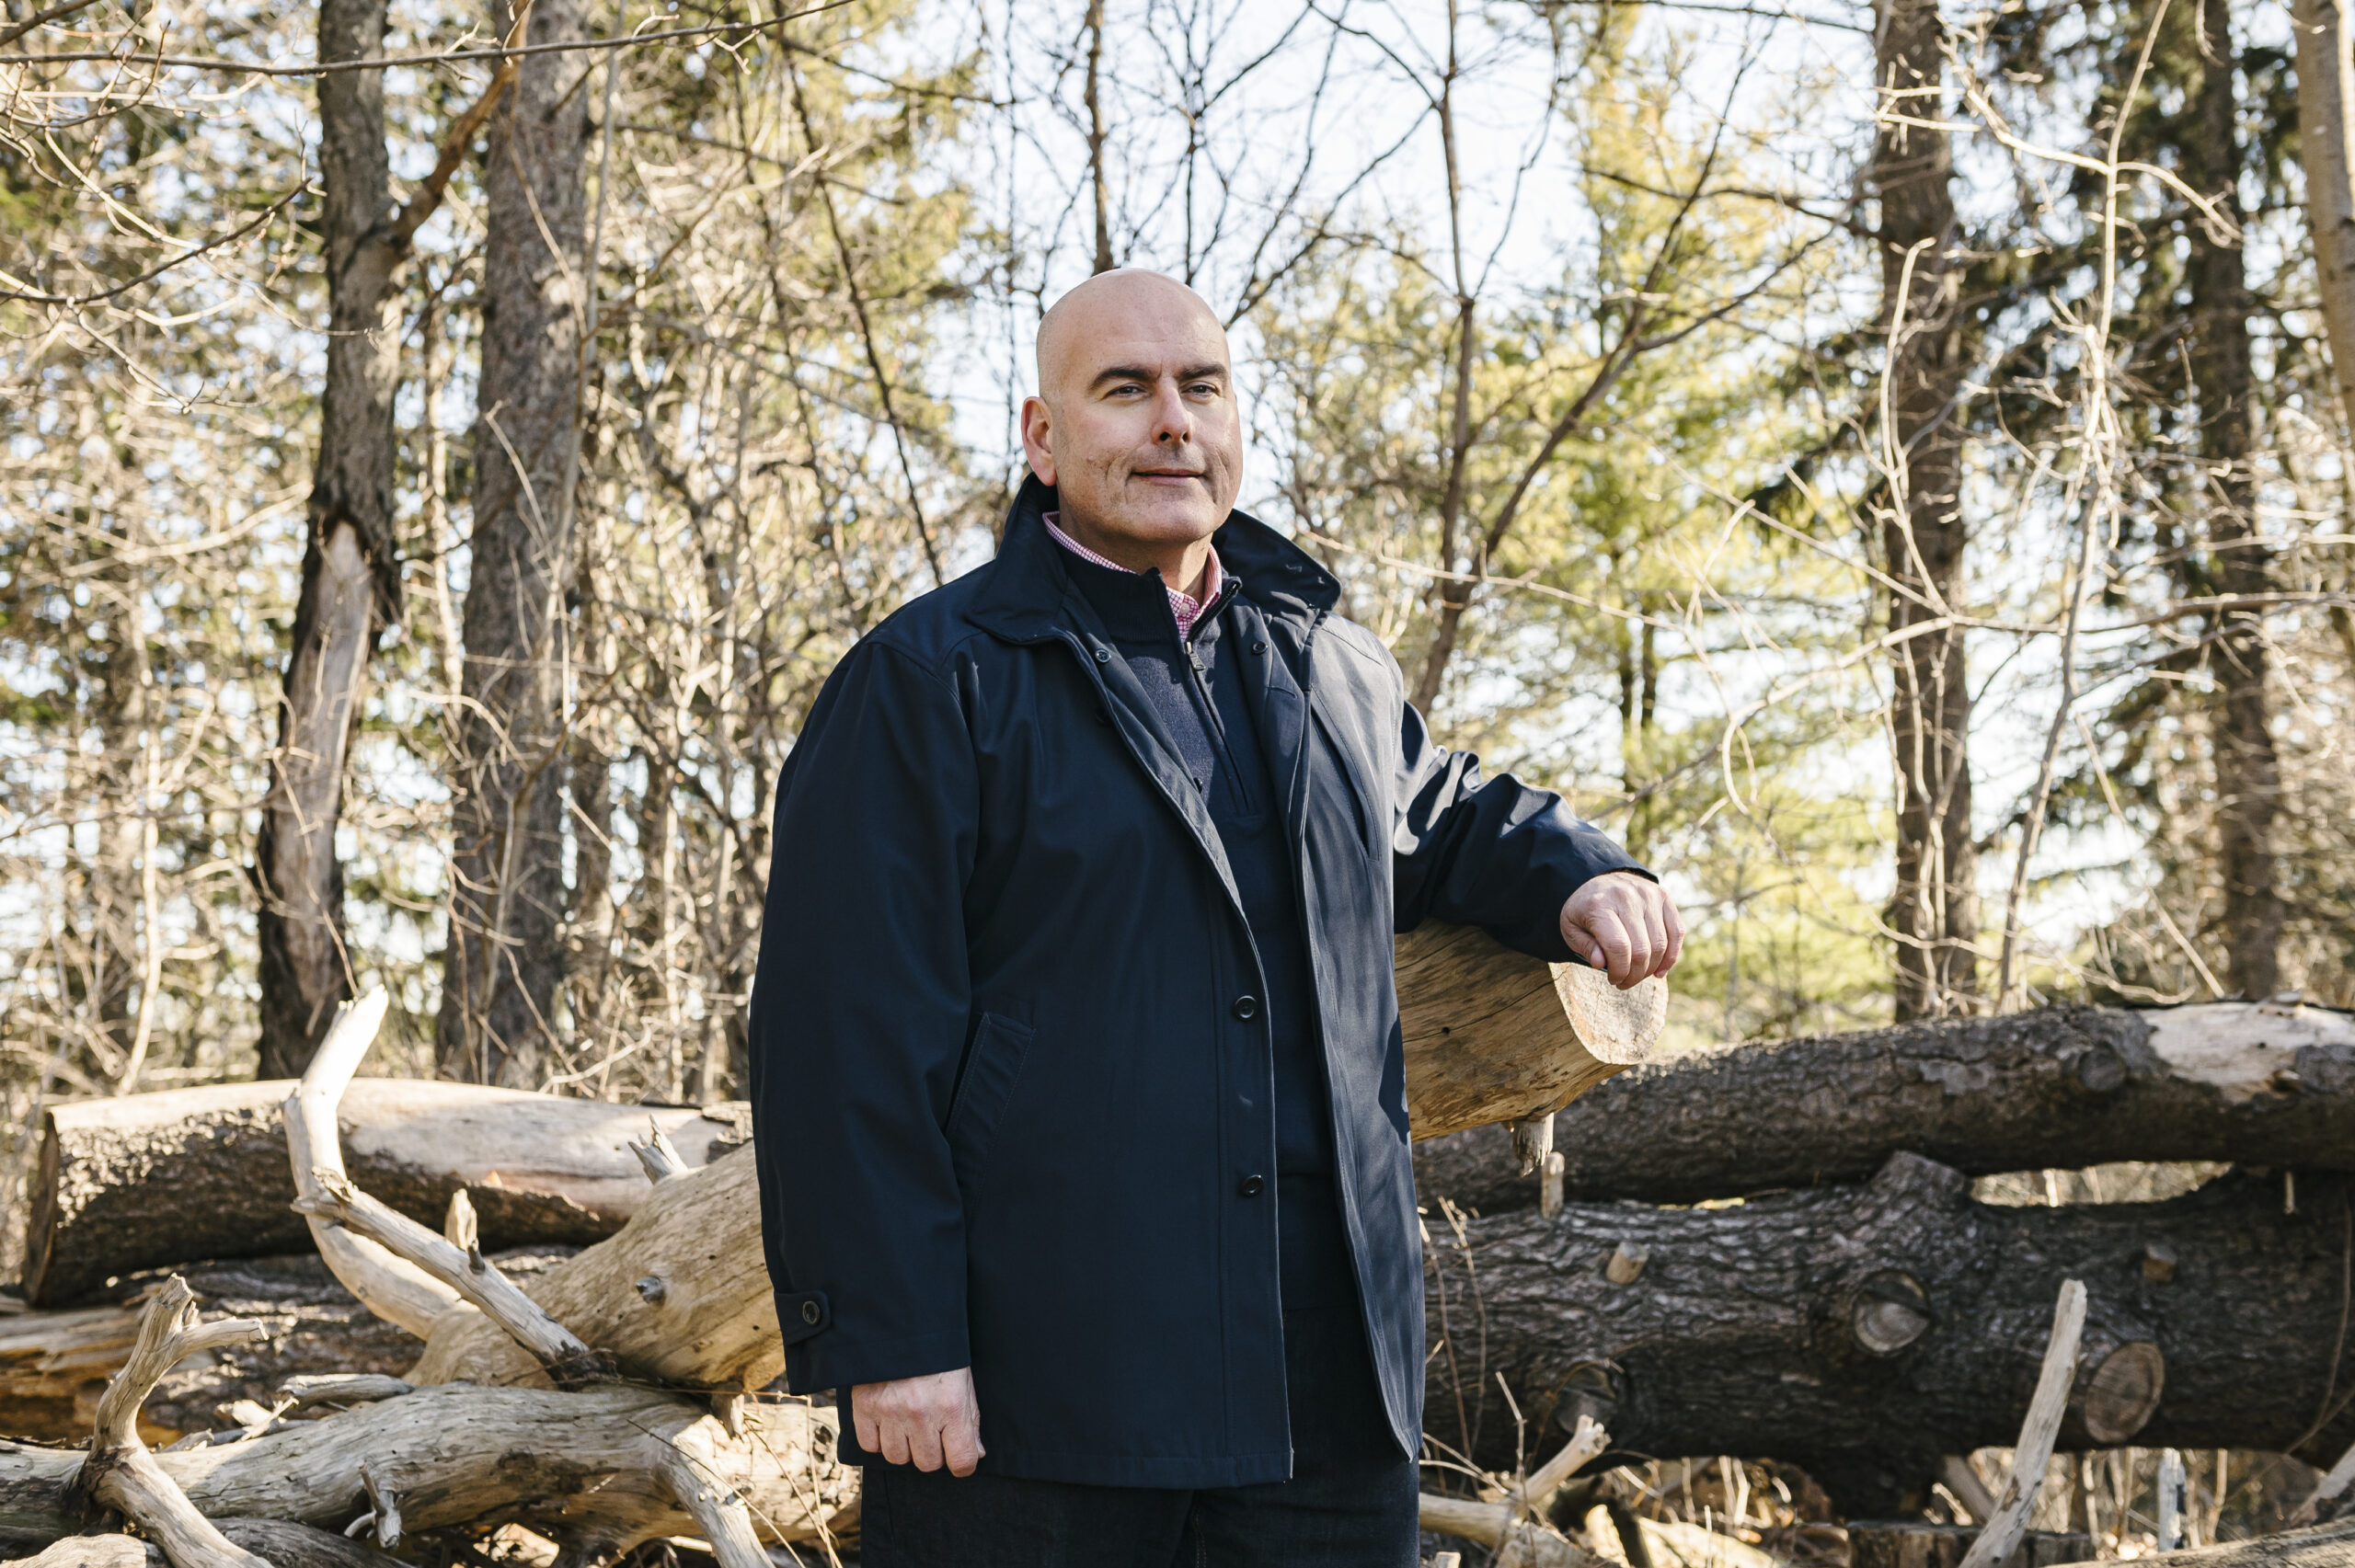 Steven Del Duca leans on a log in a brightly lit forest, smiling slightly.